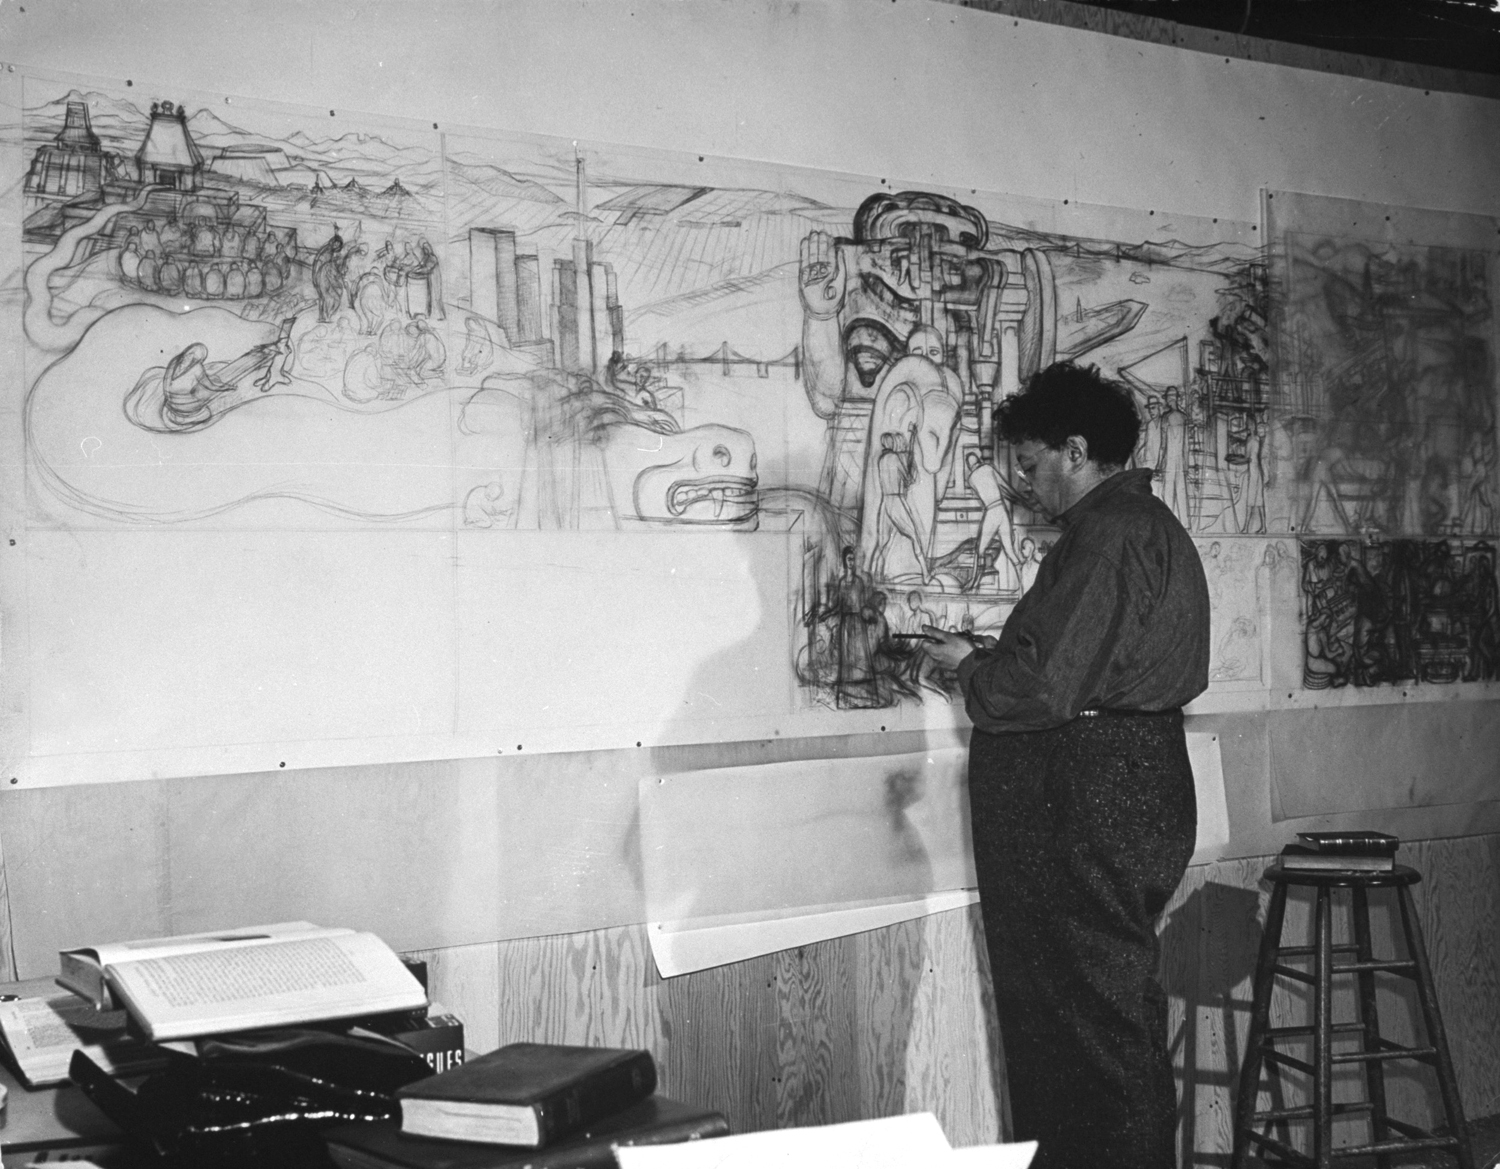 Diego Rivera working on pencil sketches for huge mural depicting Pan-American unity, Palace of Fine Arts, San Francisco, 1941.